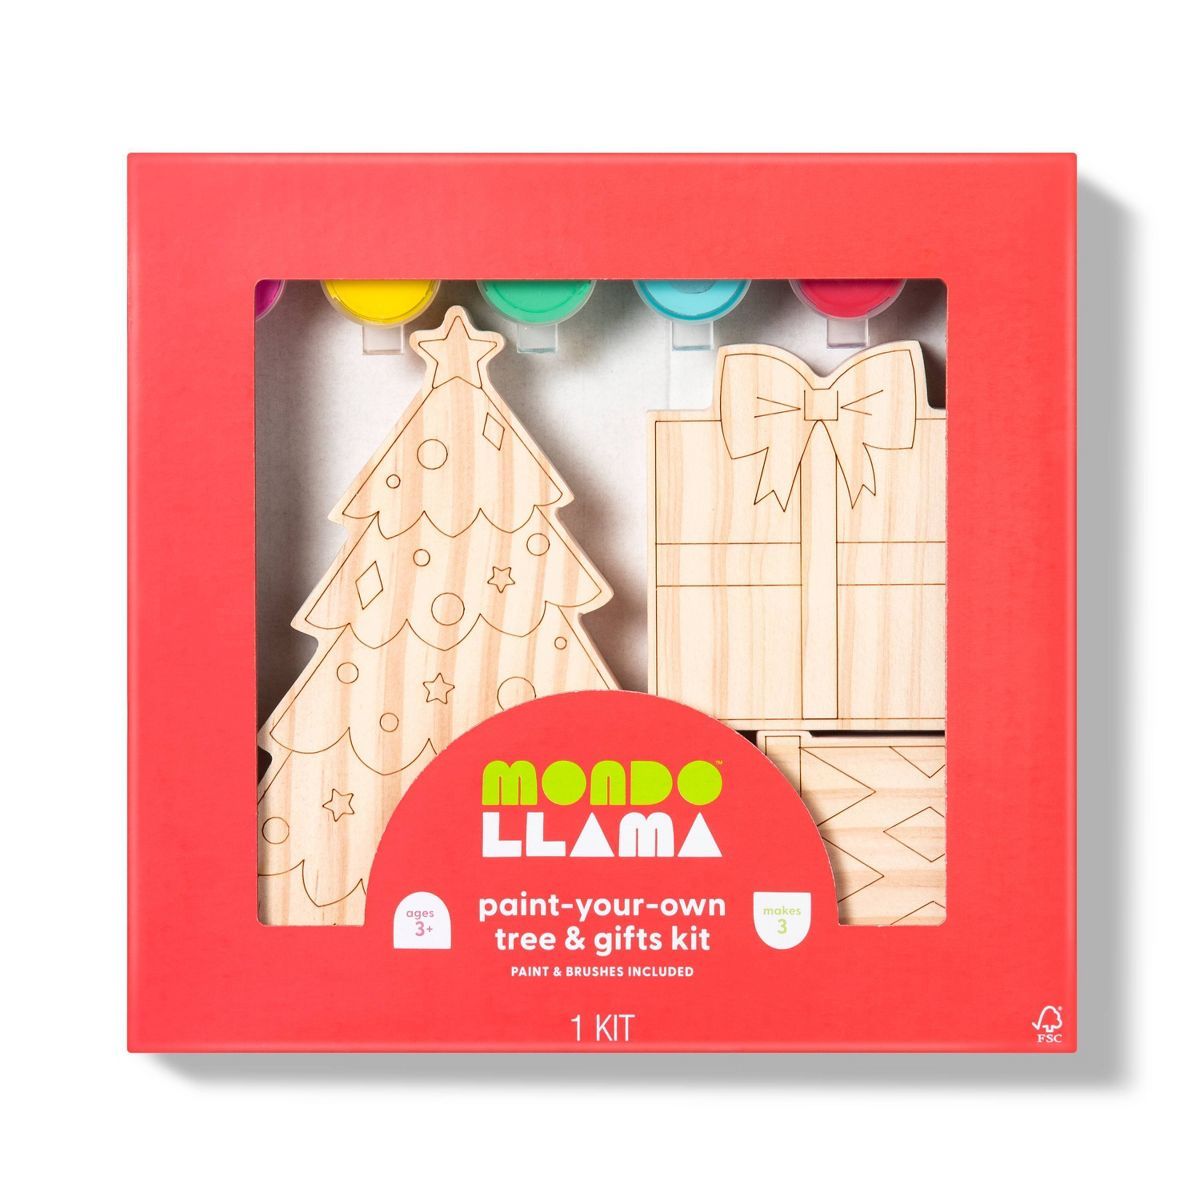 Paint-Your-Own Wood Trees & Gifts Christmas Kit - Mondo Llama™ | Target